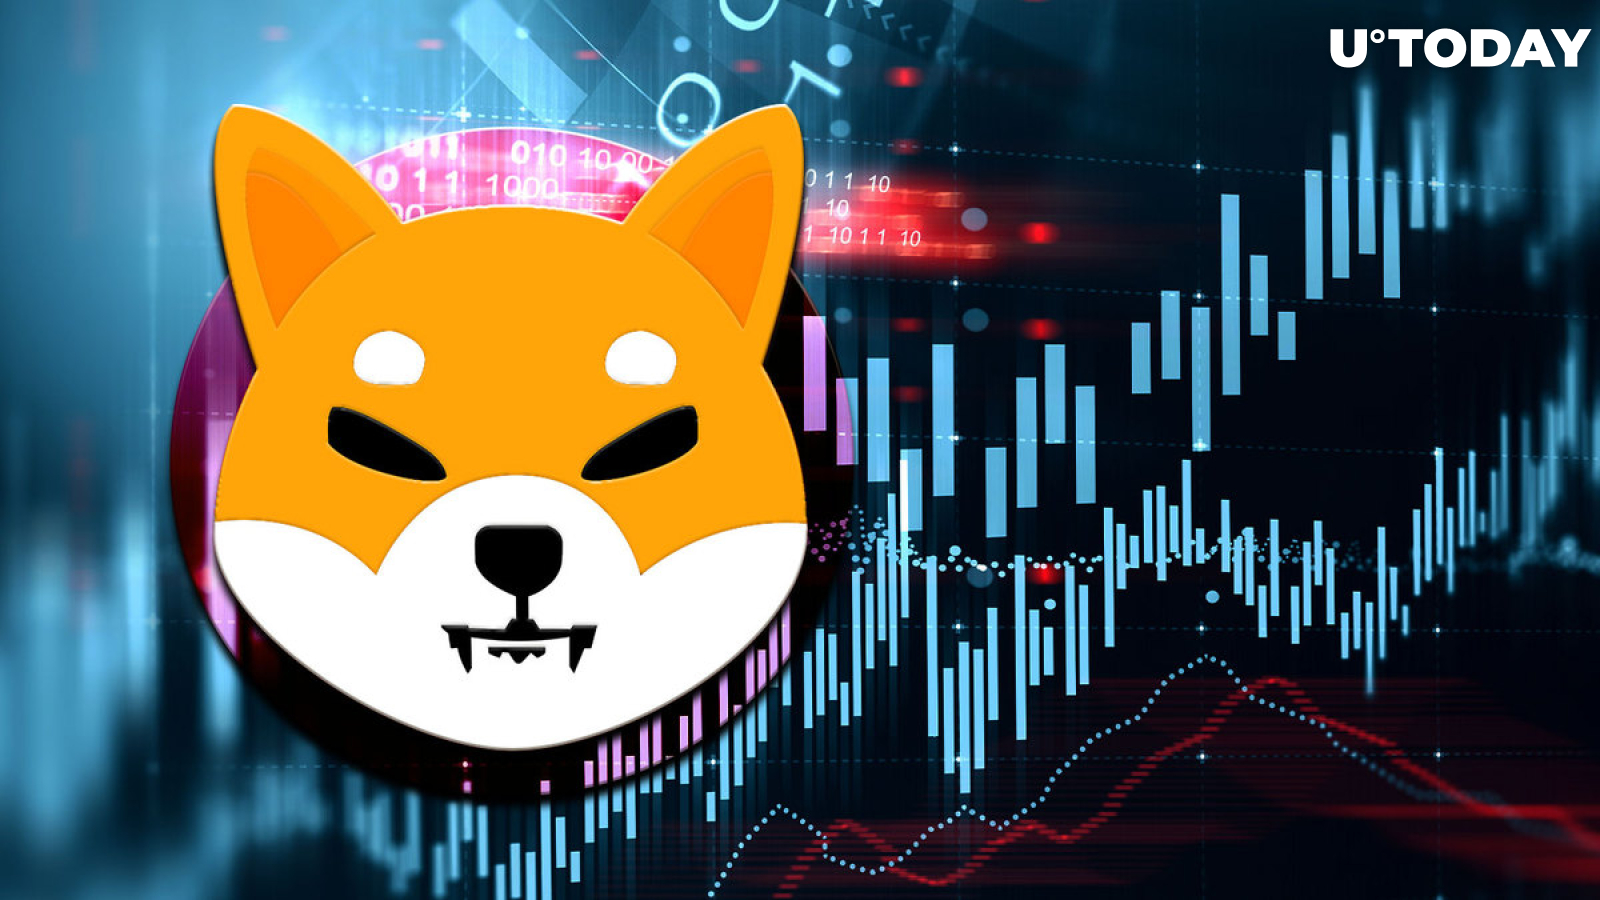 Shiba Inu Ecosystem's Token up 20% in 2 Weeks, Here's What Everyone Missed